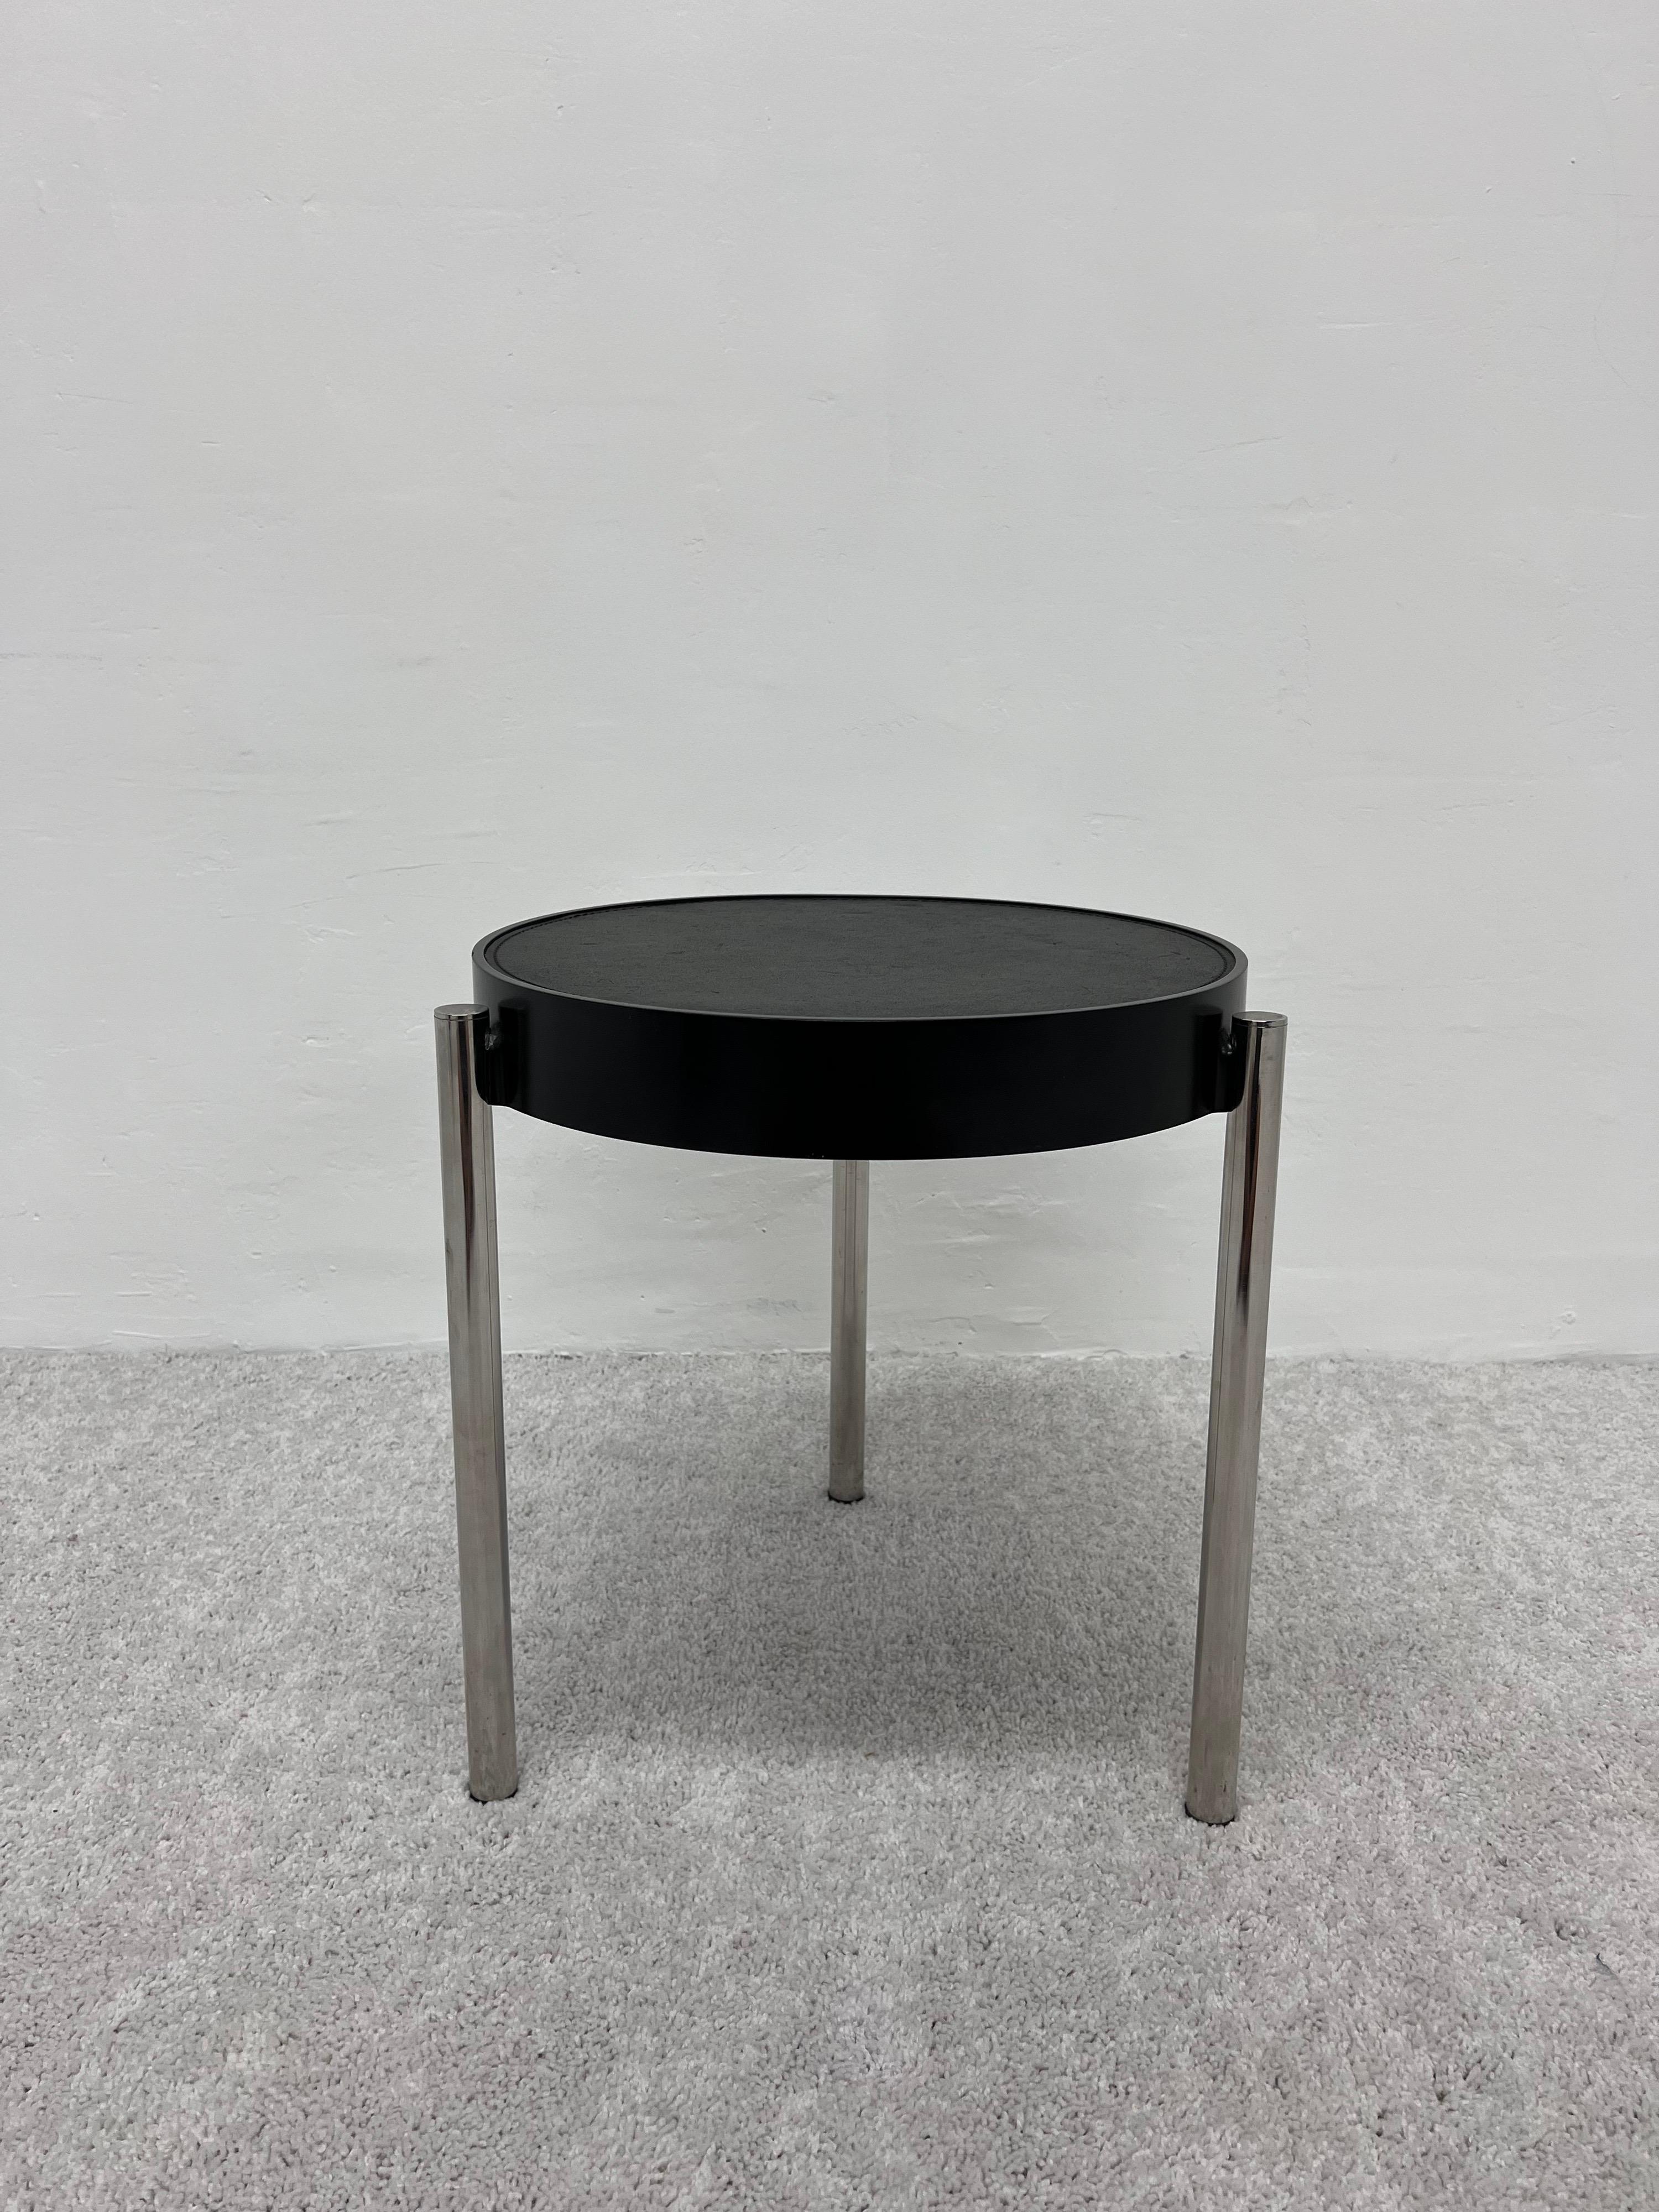 20th Century Brighella Black Leather and Chrome Side Table for Zanotta, Historical Archive For Sale